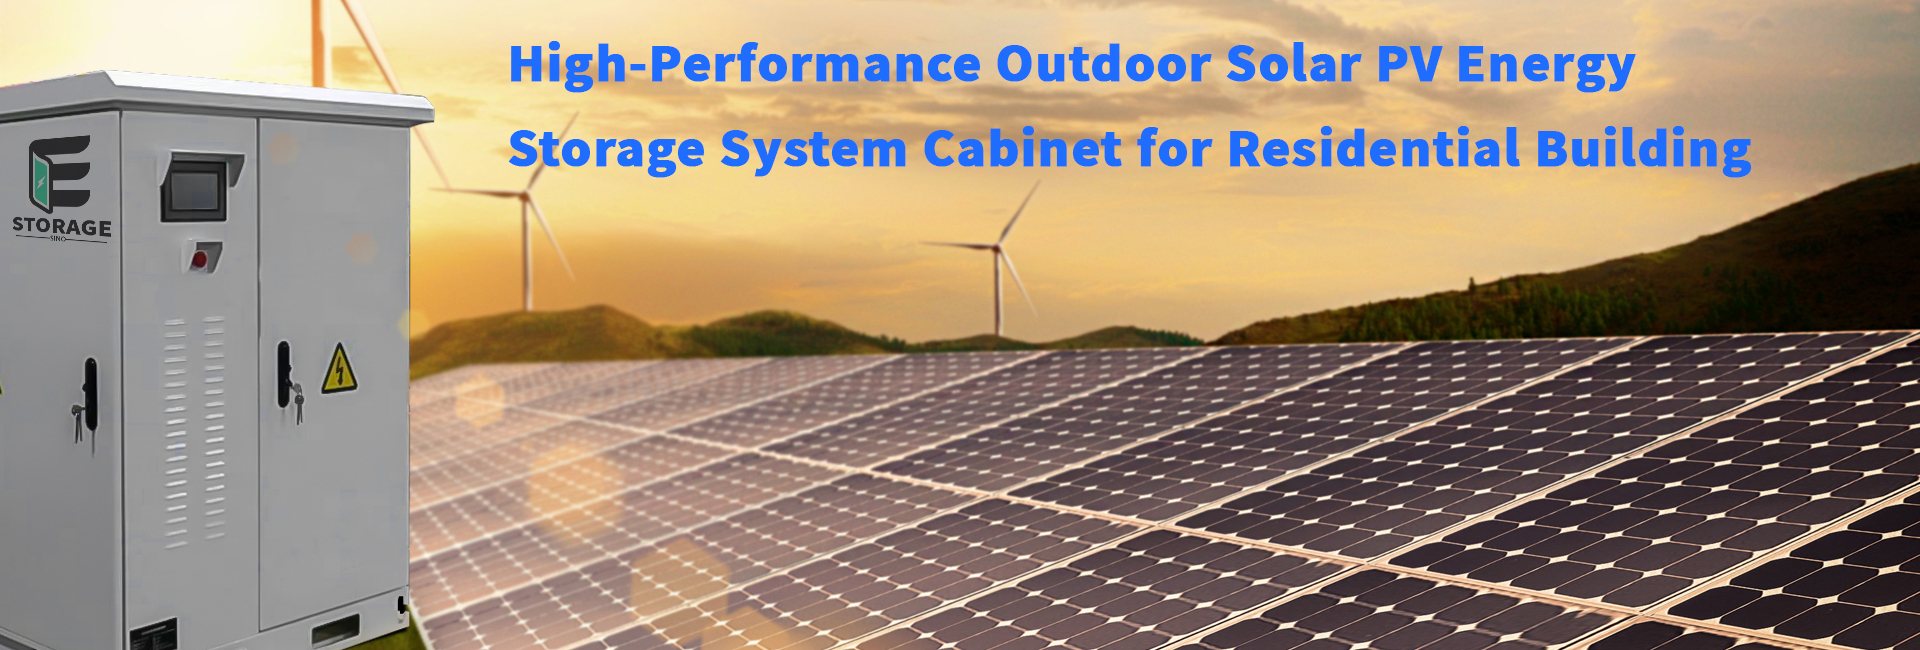 Outdoor Solar PV Energy Storage System Cabinet for Residential Building